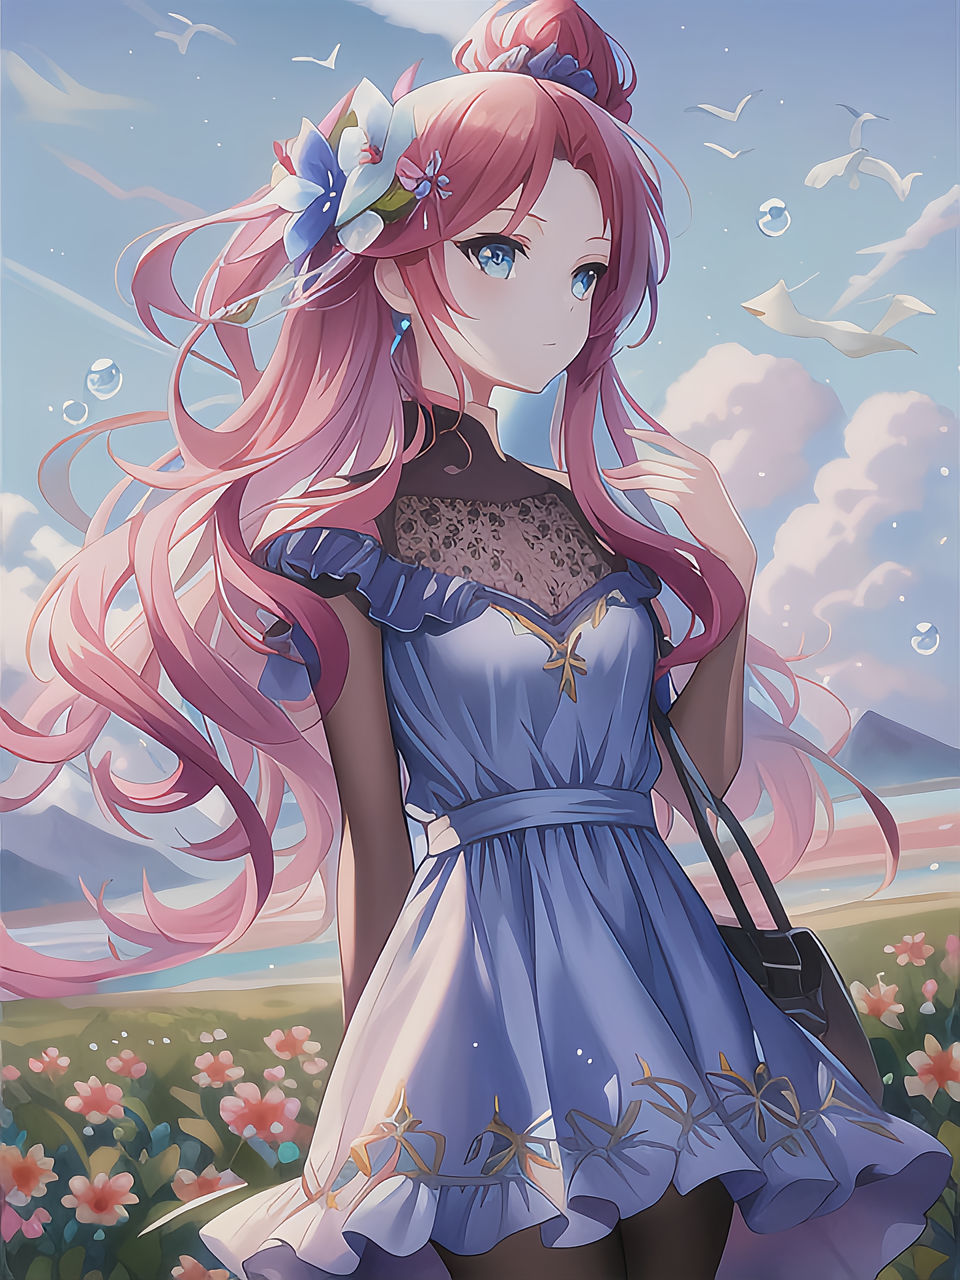 anime, cartoon, women, one person, adult, fashion, nature, clothing, young adult, sky, dress, manga, flower, plant, female, flowering plant, beauty in nature, portrait, hairstyle, outdoors, screenshot, blue, arts culture and entertainment, person, three quarter length, standing, cloud, fantasy